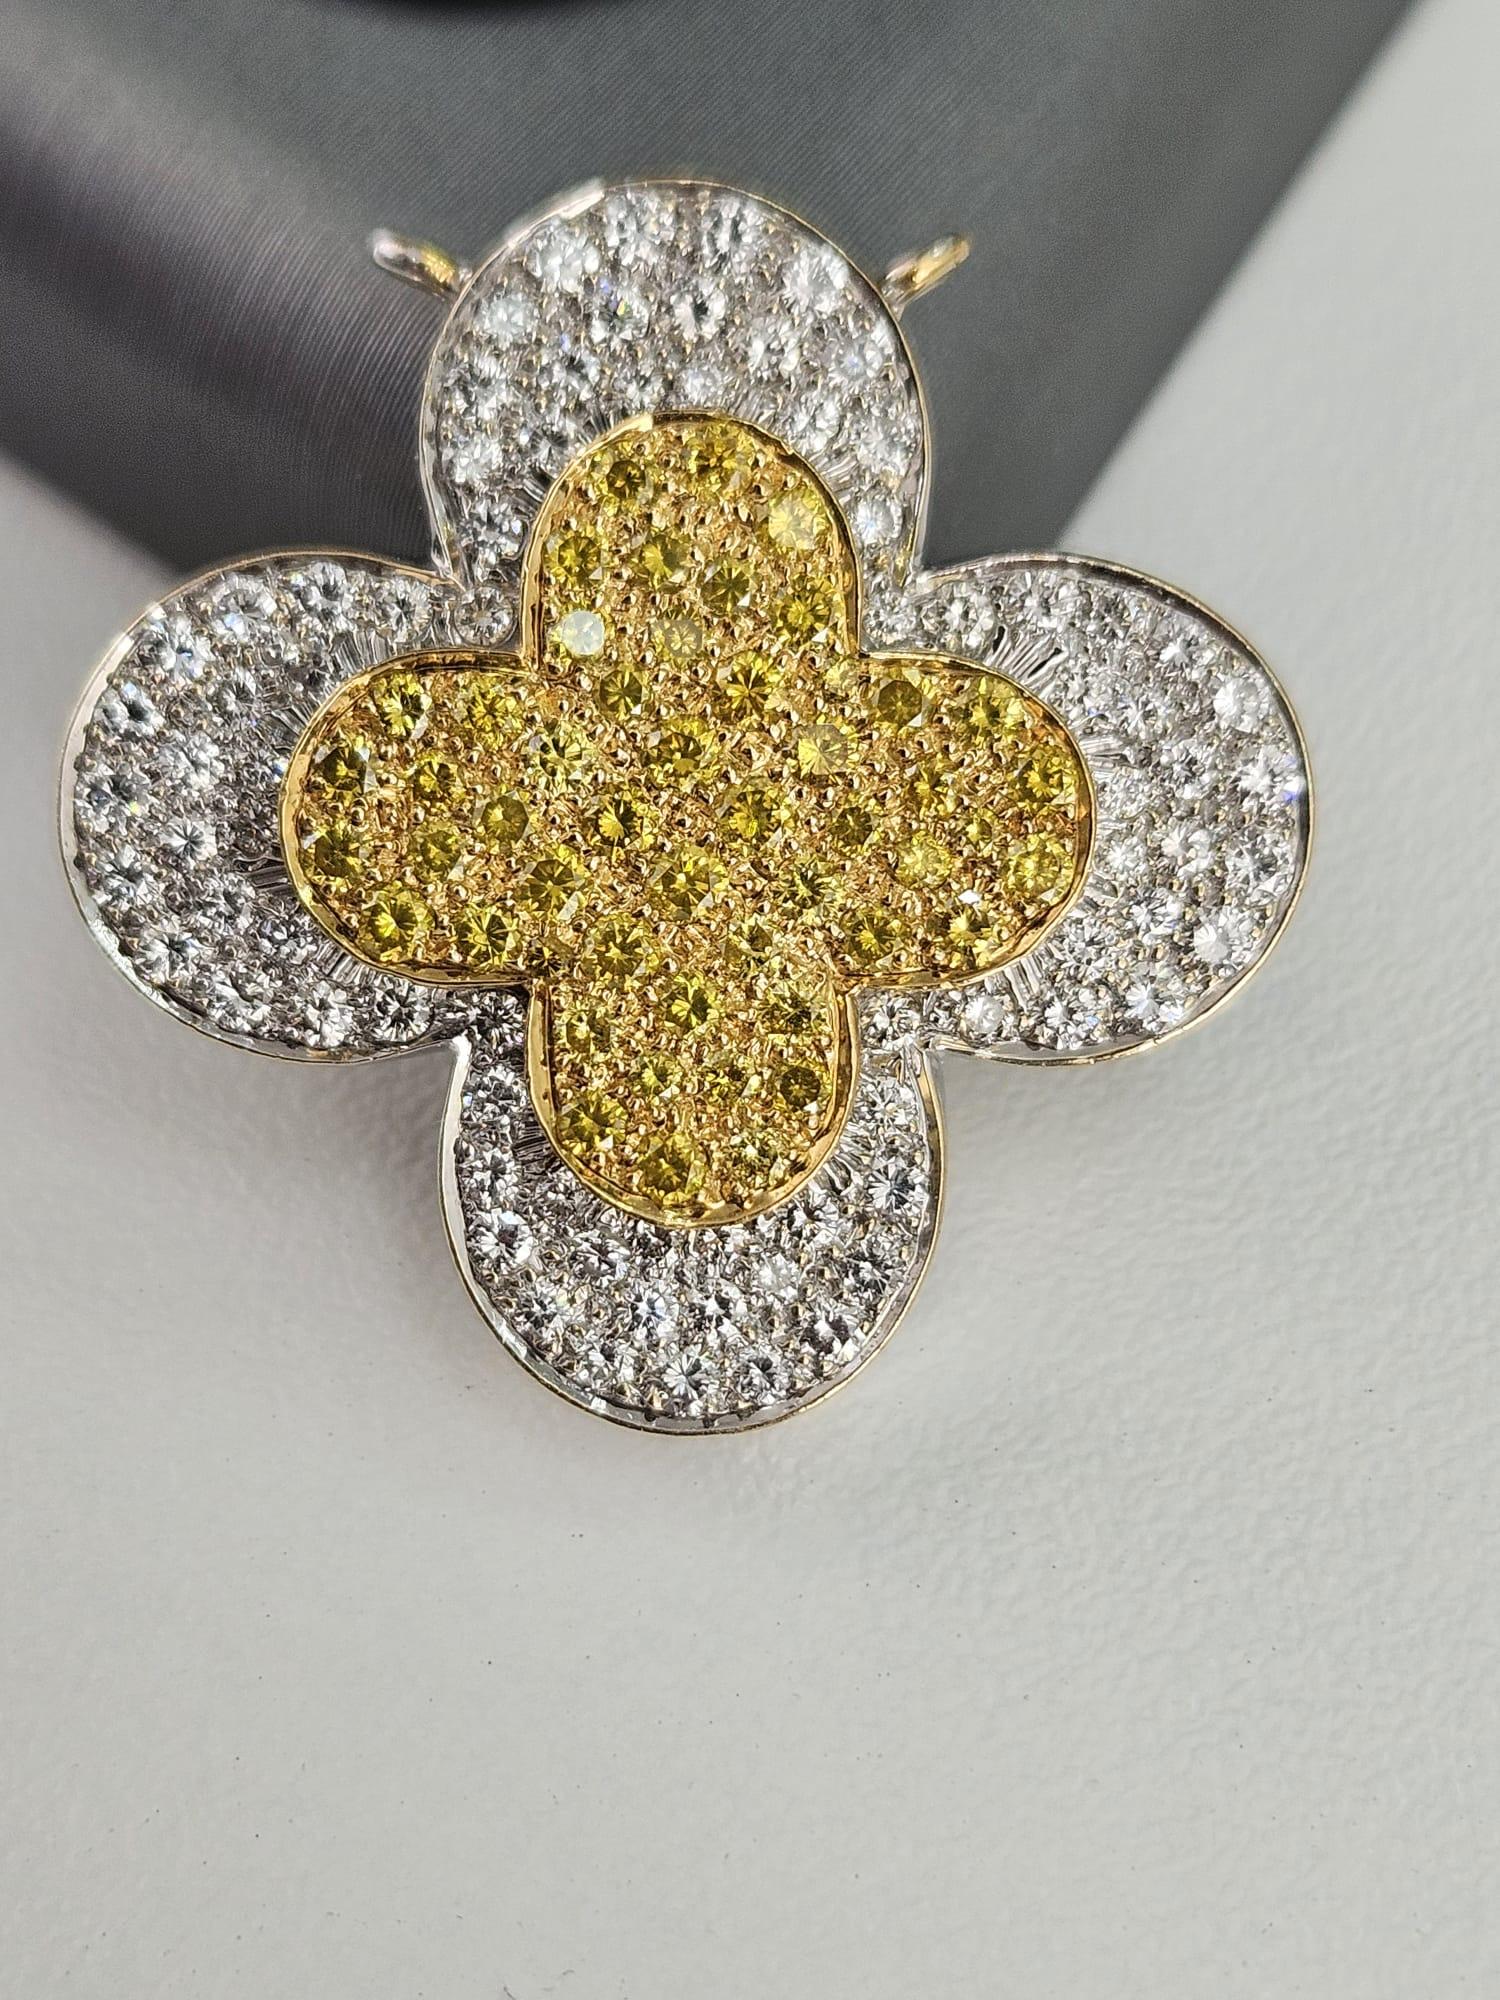 Introducing a stunning 2.14-carat Canary and White Diamond pendant, designed in a captivating clover shape that radiates both charm and sophistication. At the heart of this enchanting piece is a vibrant 0.99-carat Canary Diamond, captivating with